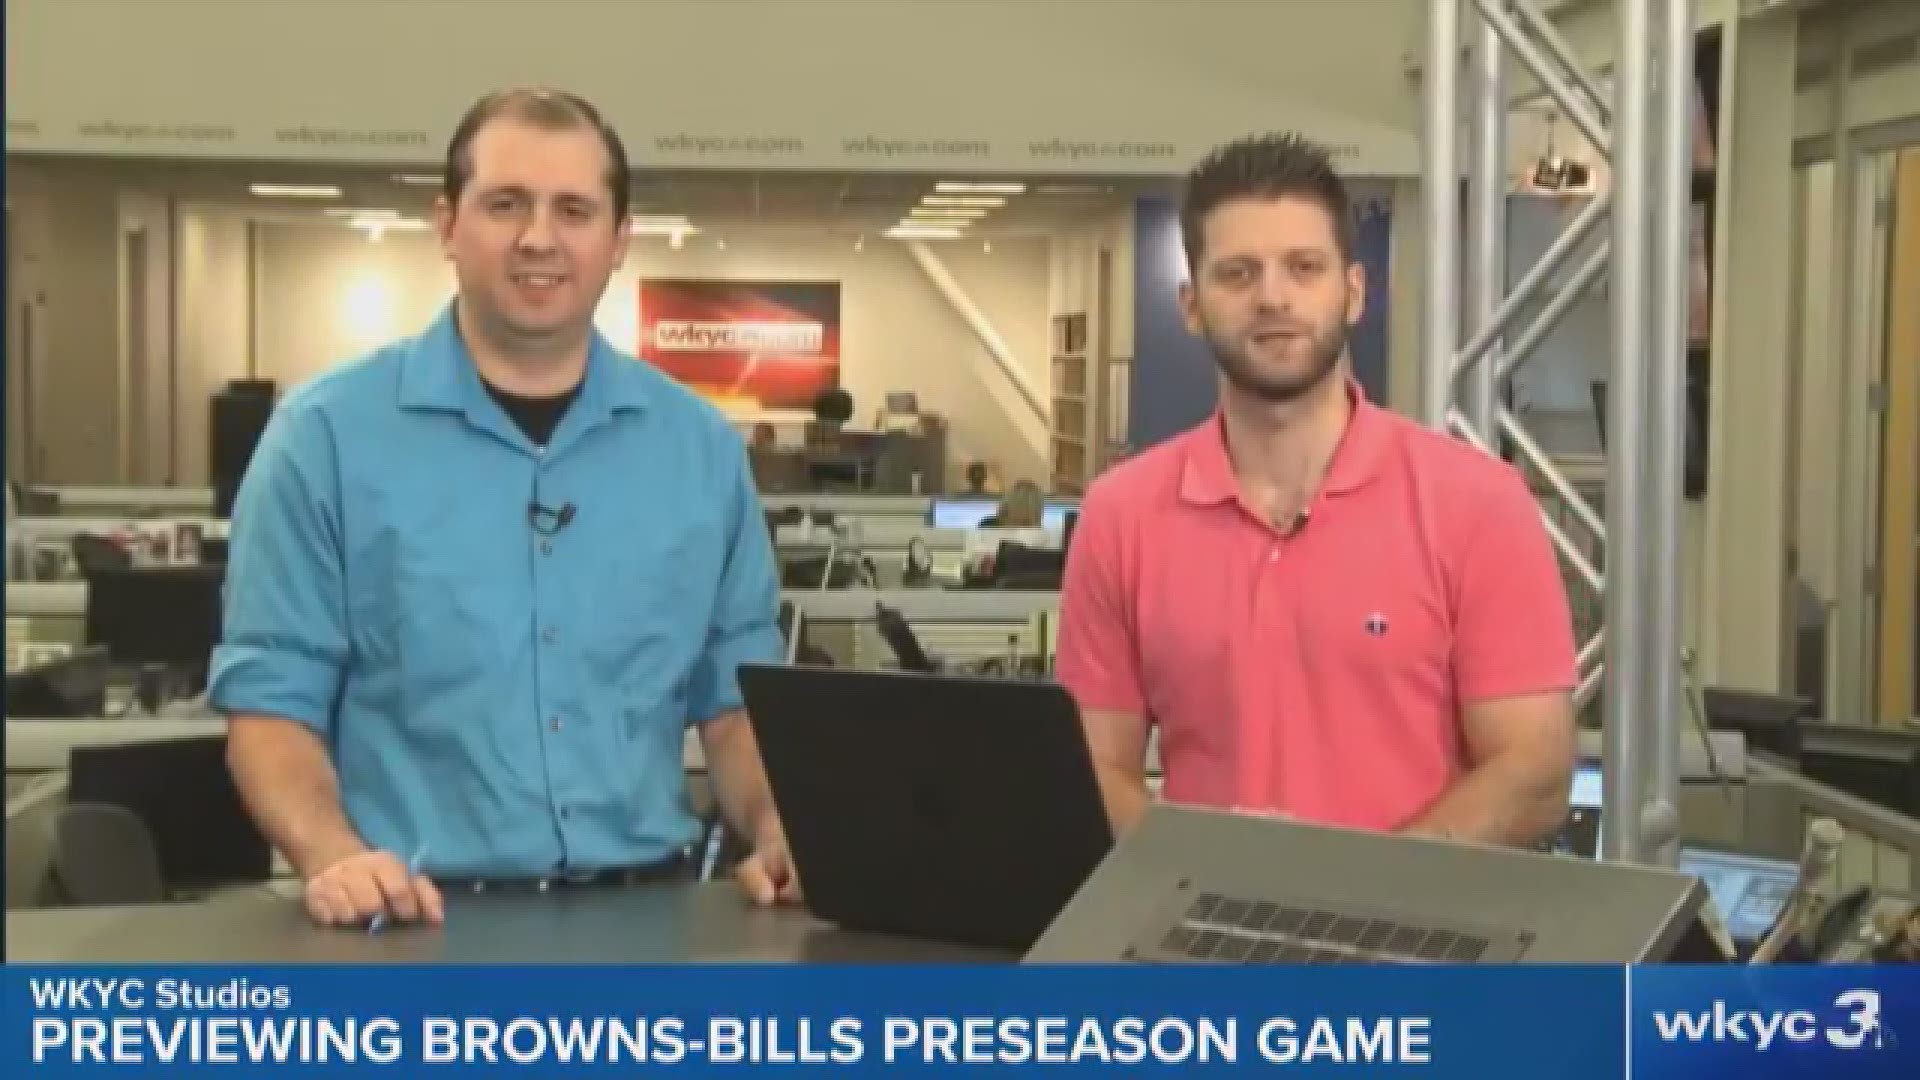 WKYC's Ben Axelrod and Matt Florjancic preview Friday night's preseason game between the Cleveland Browns and Buffalo Bills.